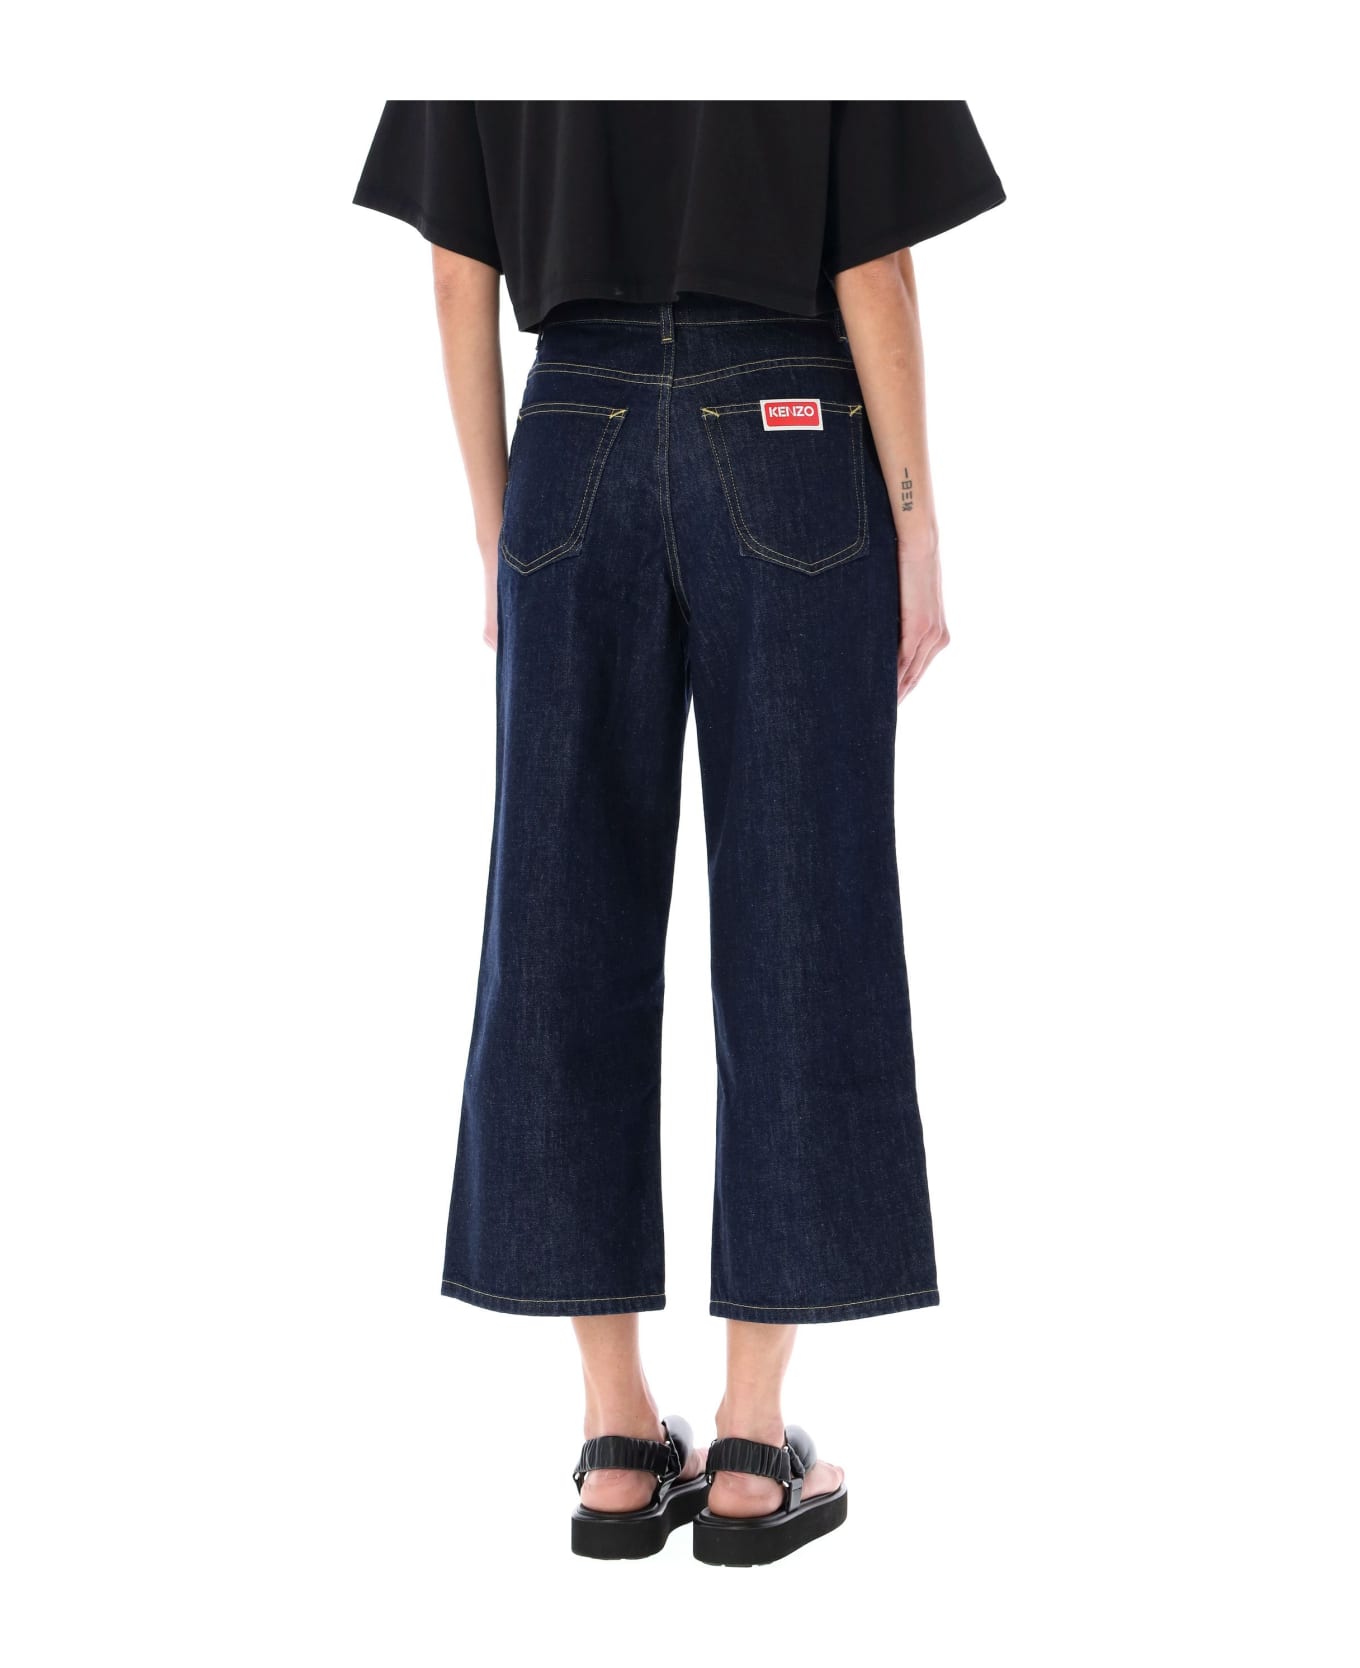 Kenzo Sumire Cropped Jeans - RINSED BLUE DENIN デニム